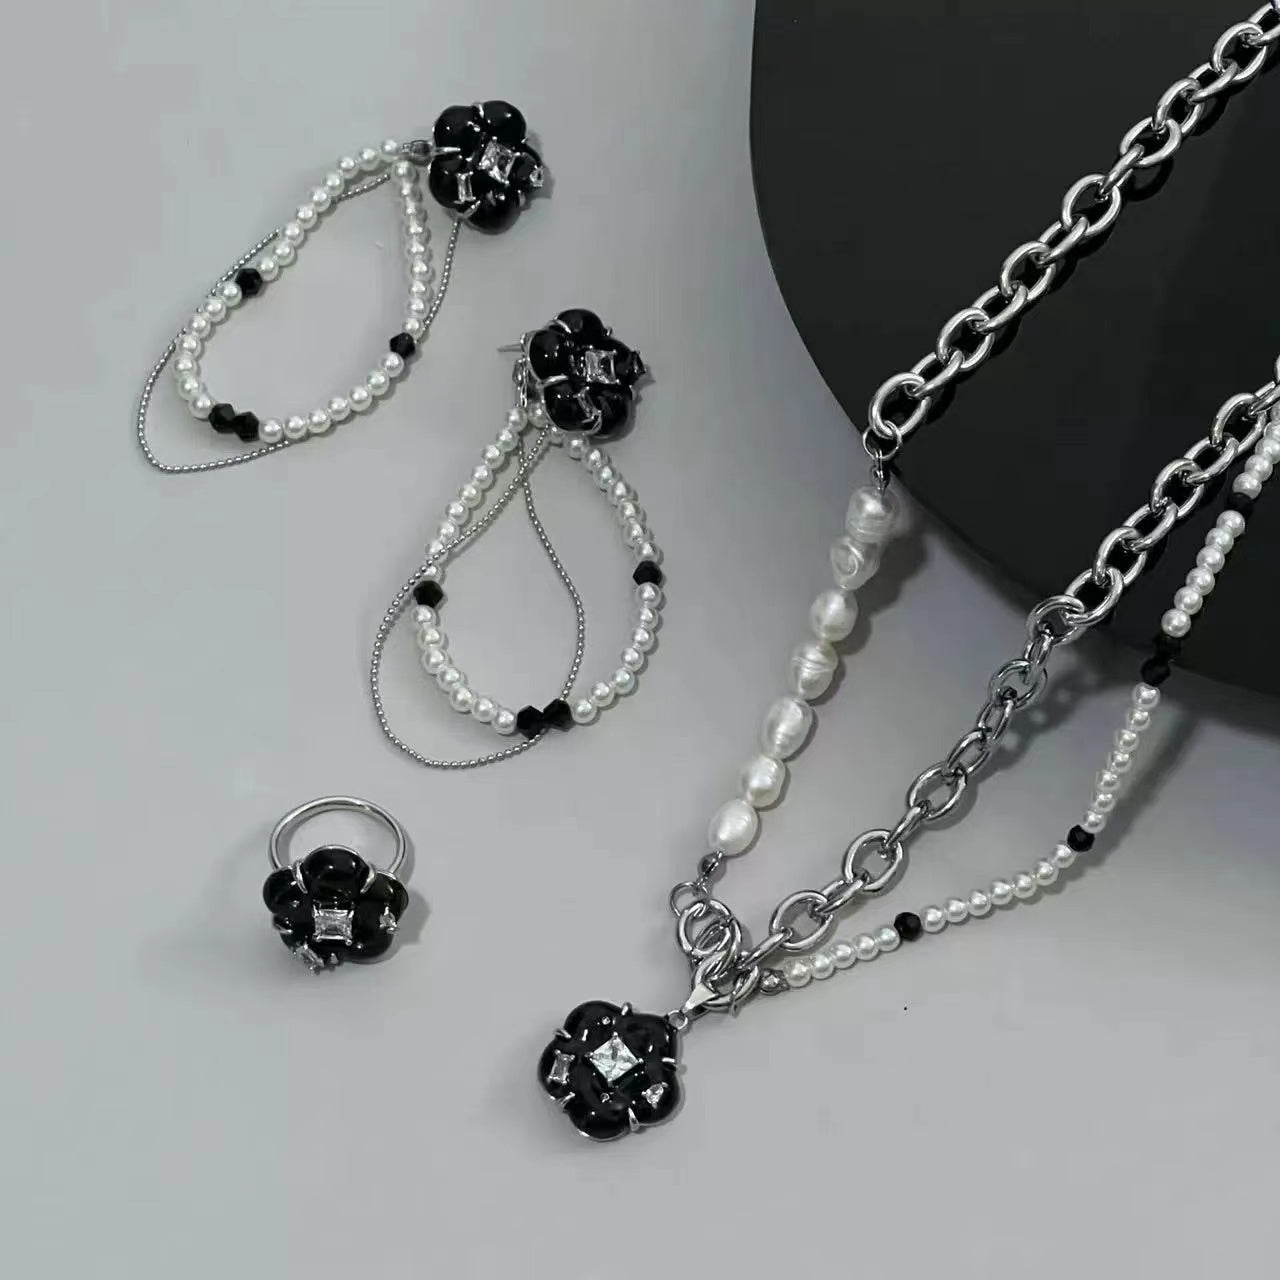 Black and white color floral necklace